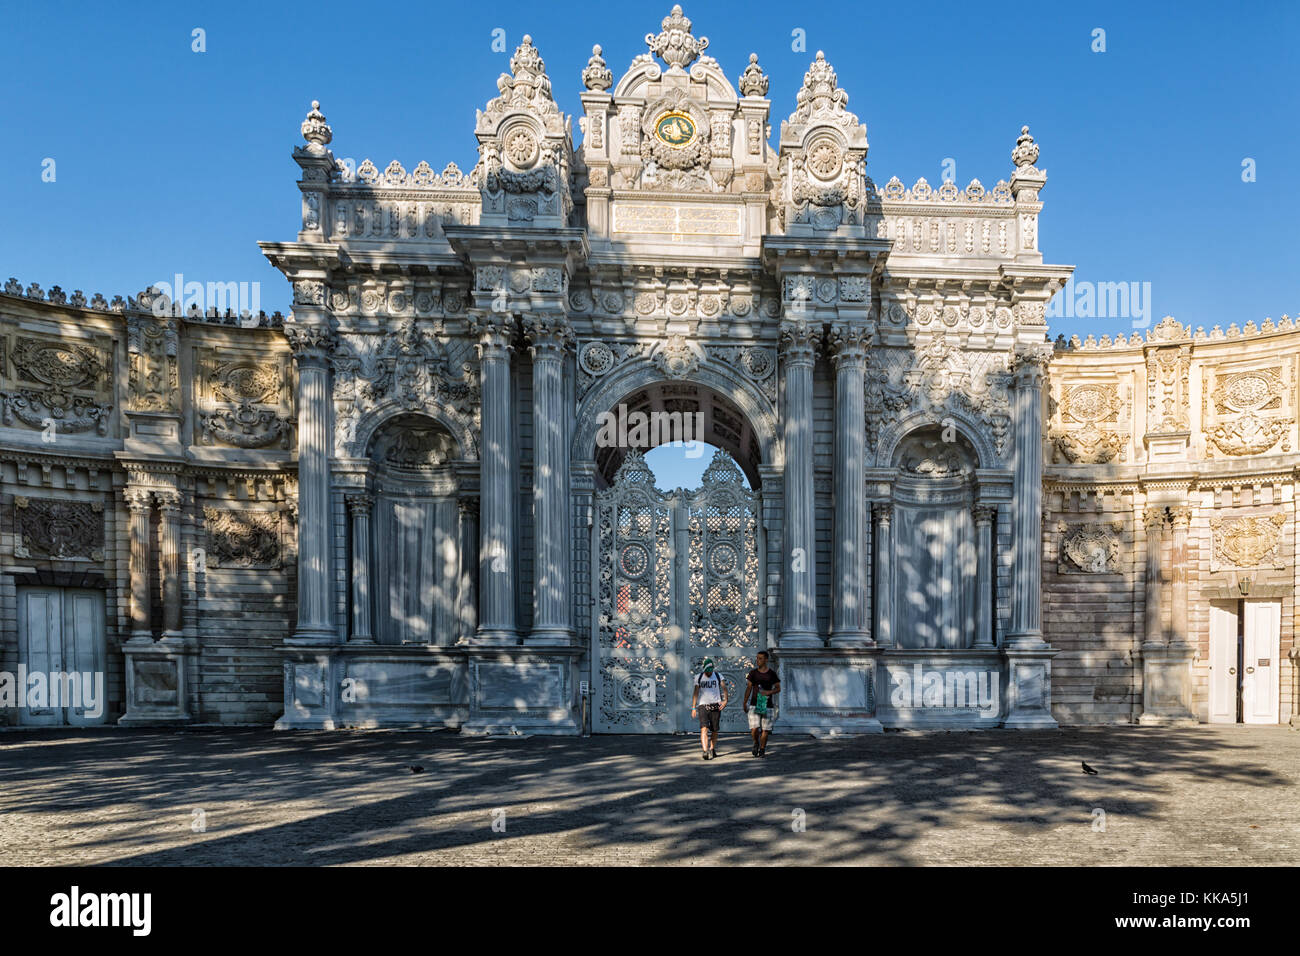 Dolmabahçe Palace, Istanbul, Turkey in daylight exterior view. Stock Photo